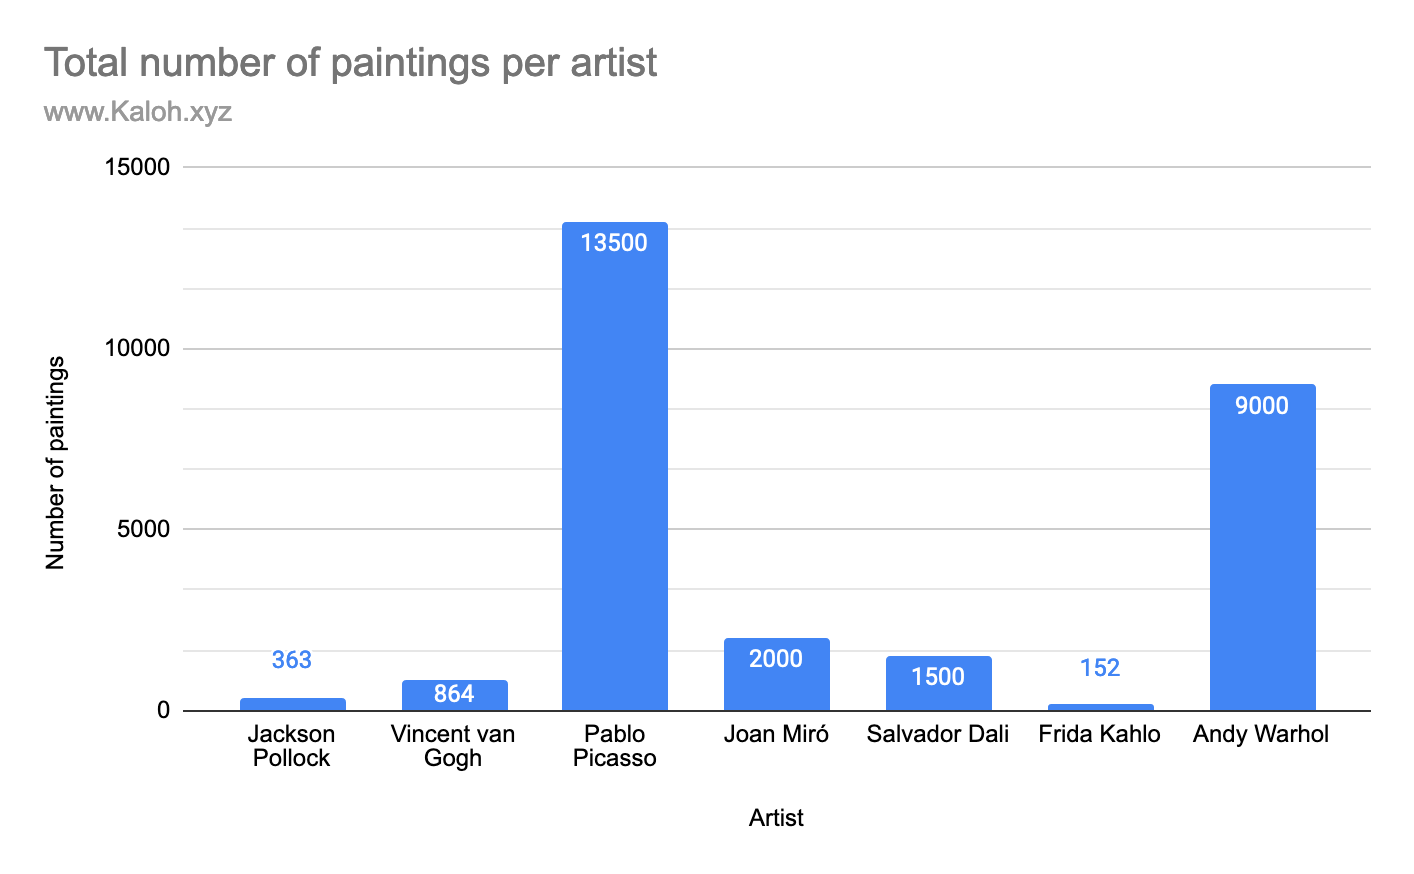 The total number of paintings per artist. Pablo Picasso and Andy Warhol were quite productive.